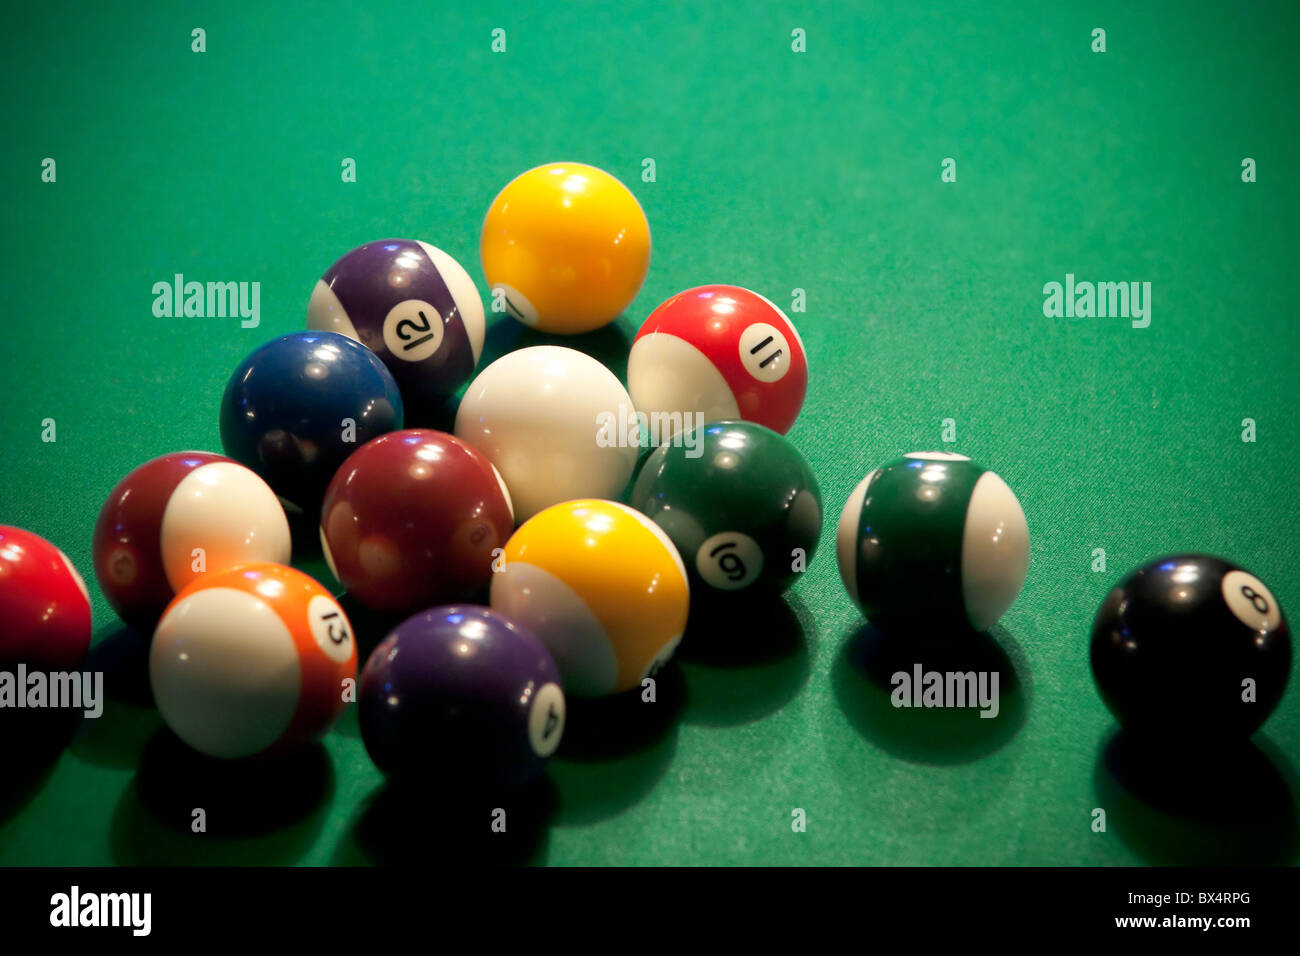 Colorful modern-style pool balls on a pool table already broken apart, waiting for the next player. Stock Photo